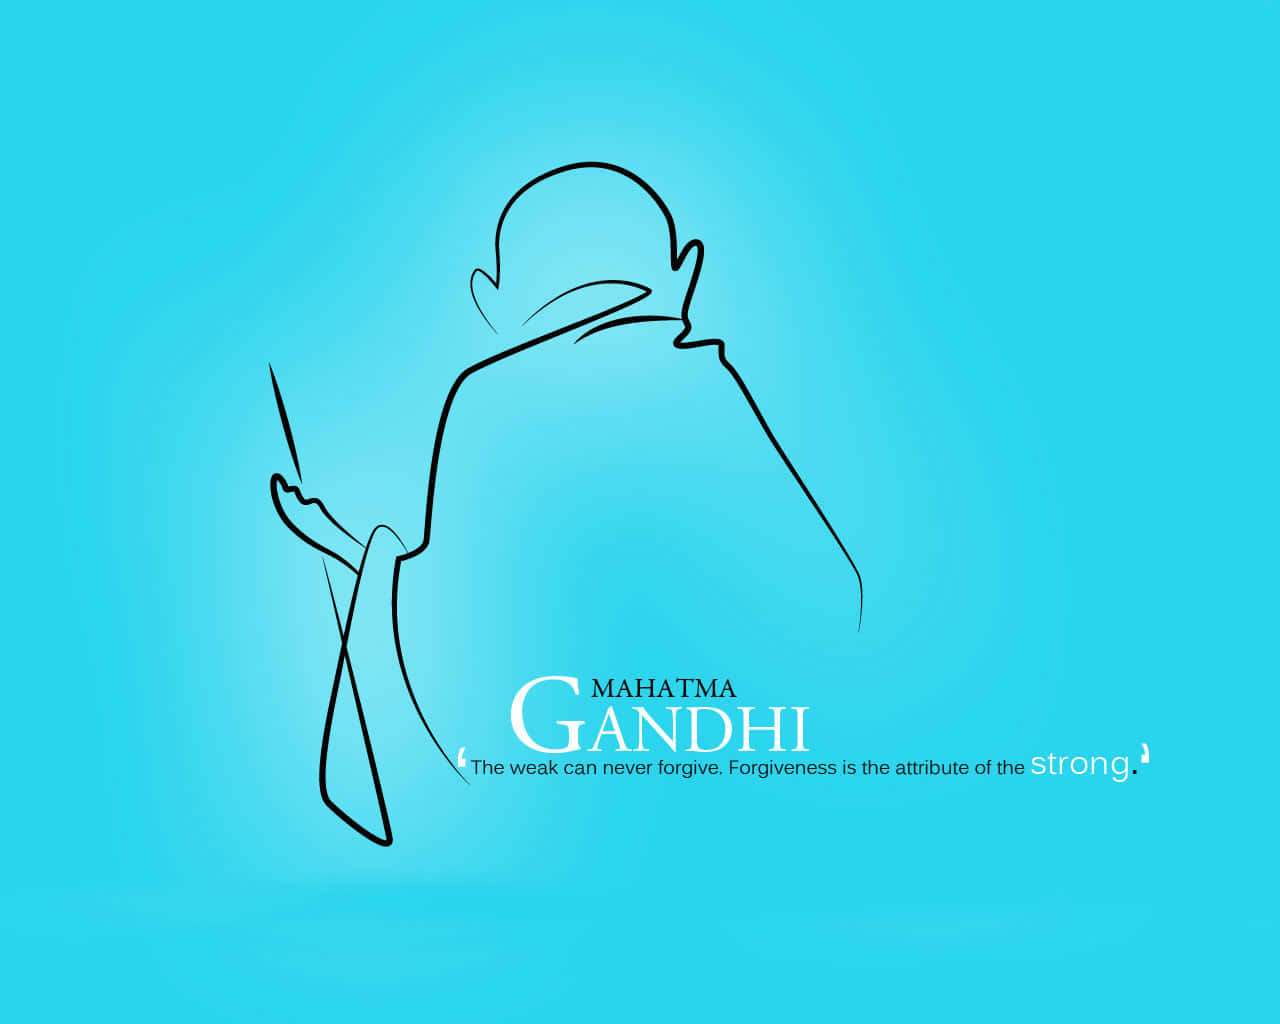 Mahatma Gandhi, the leader of India's independence movement and renowned pacifist